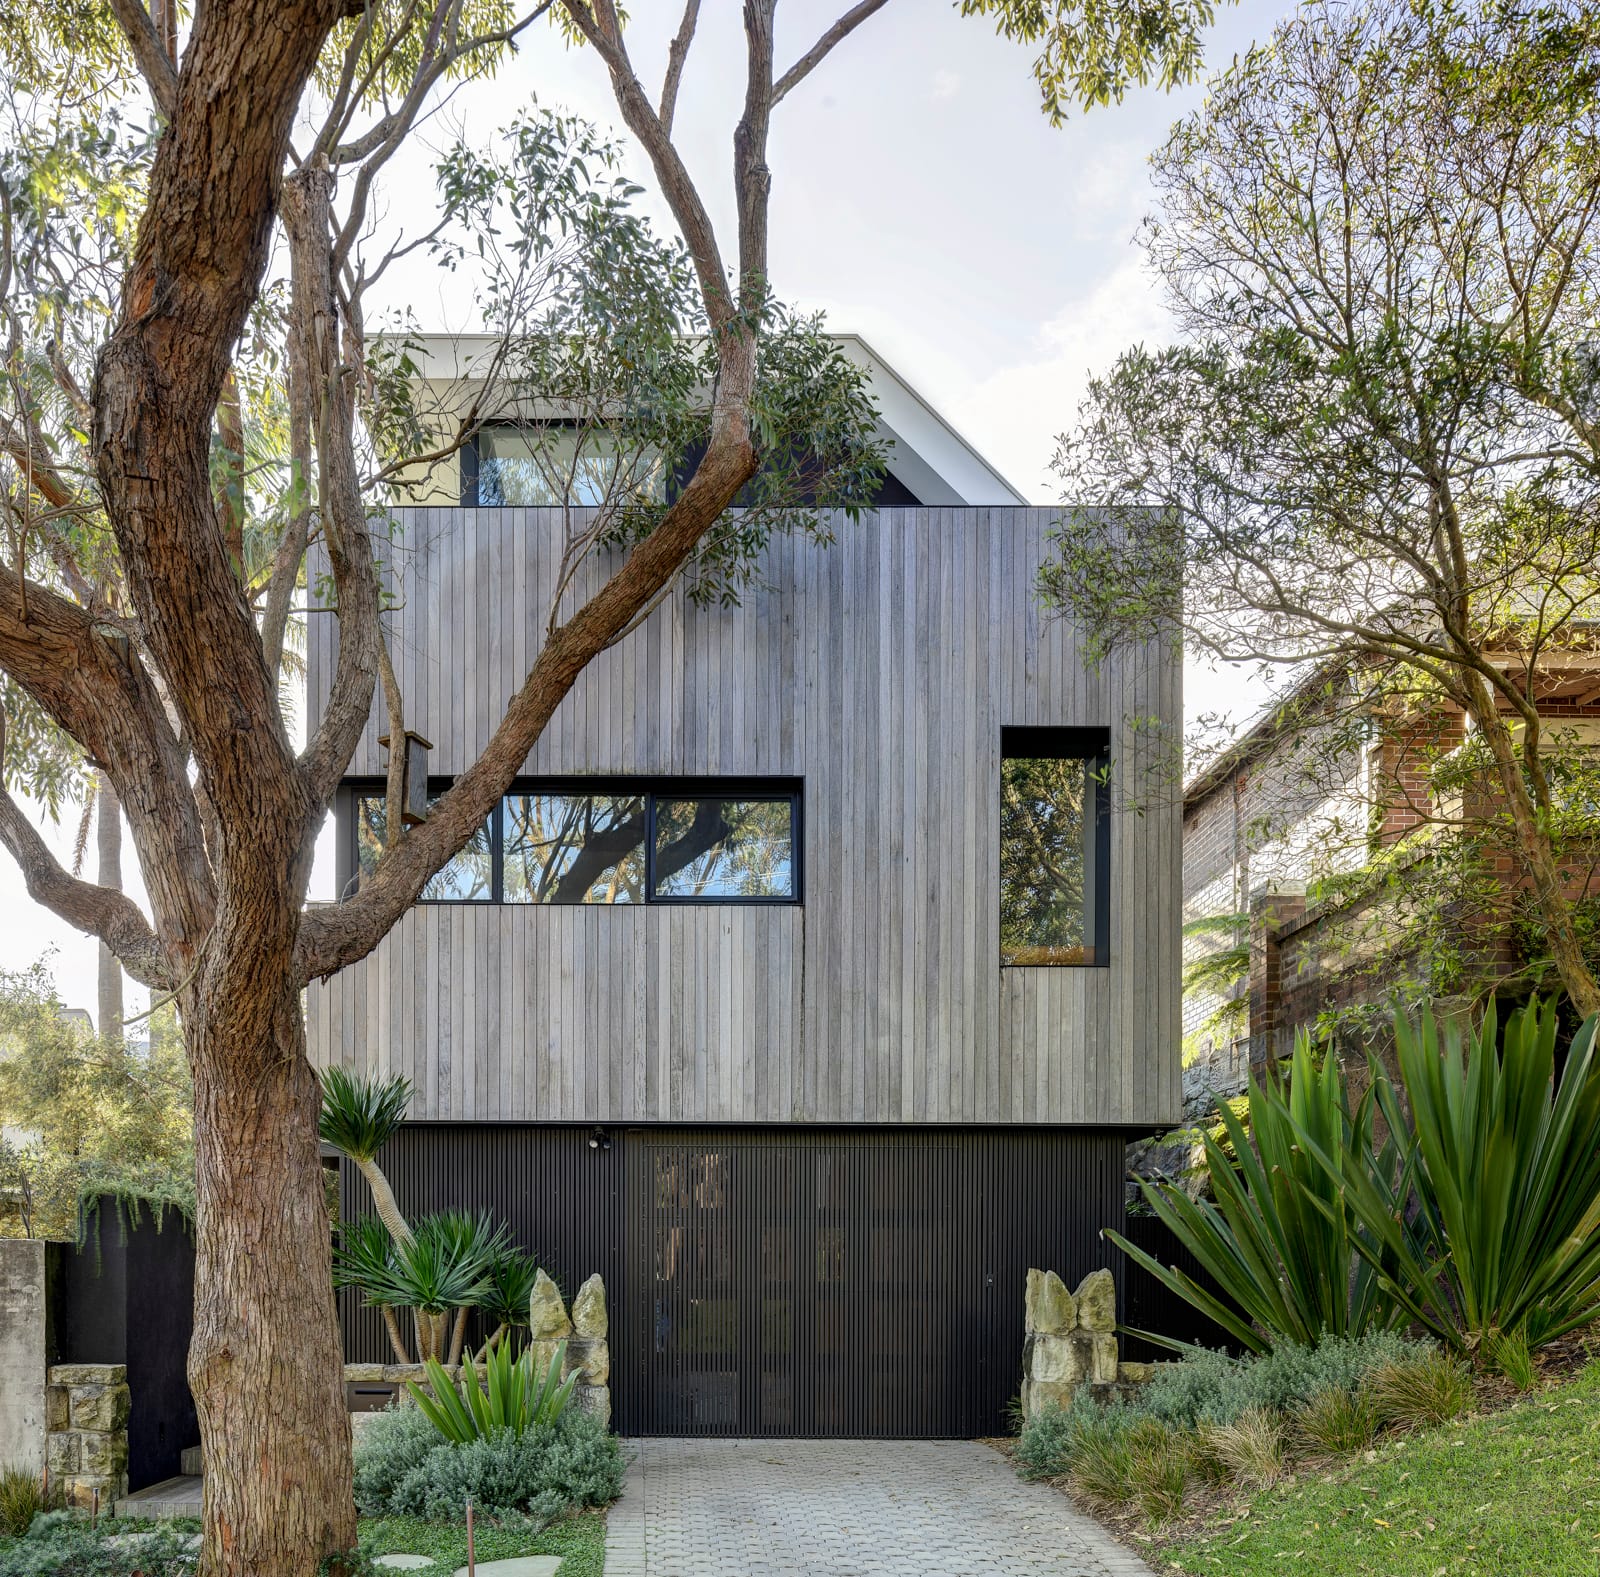 Quarry Box by MCK Architects. Photography by Brett Boardman. Street facade of timber clad, double-storey home. Aged timber clad on second story and black clad on ground floor. Stone dividing walls and green plants.